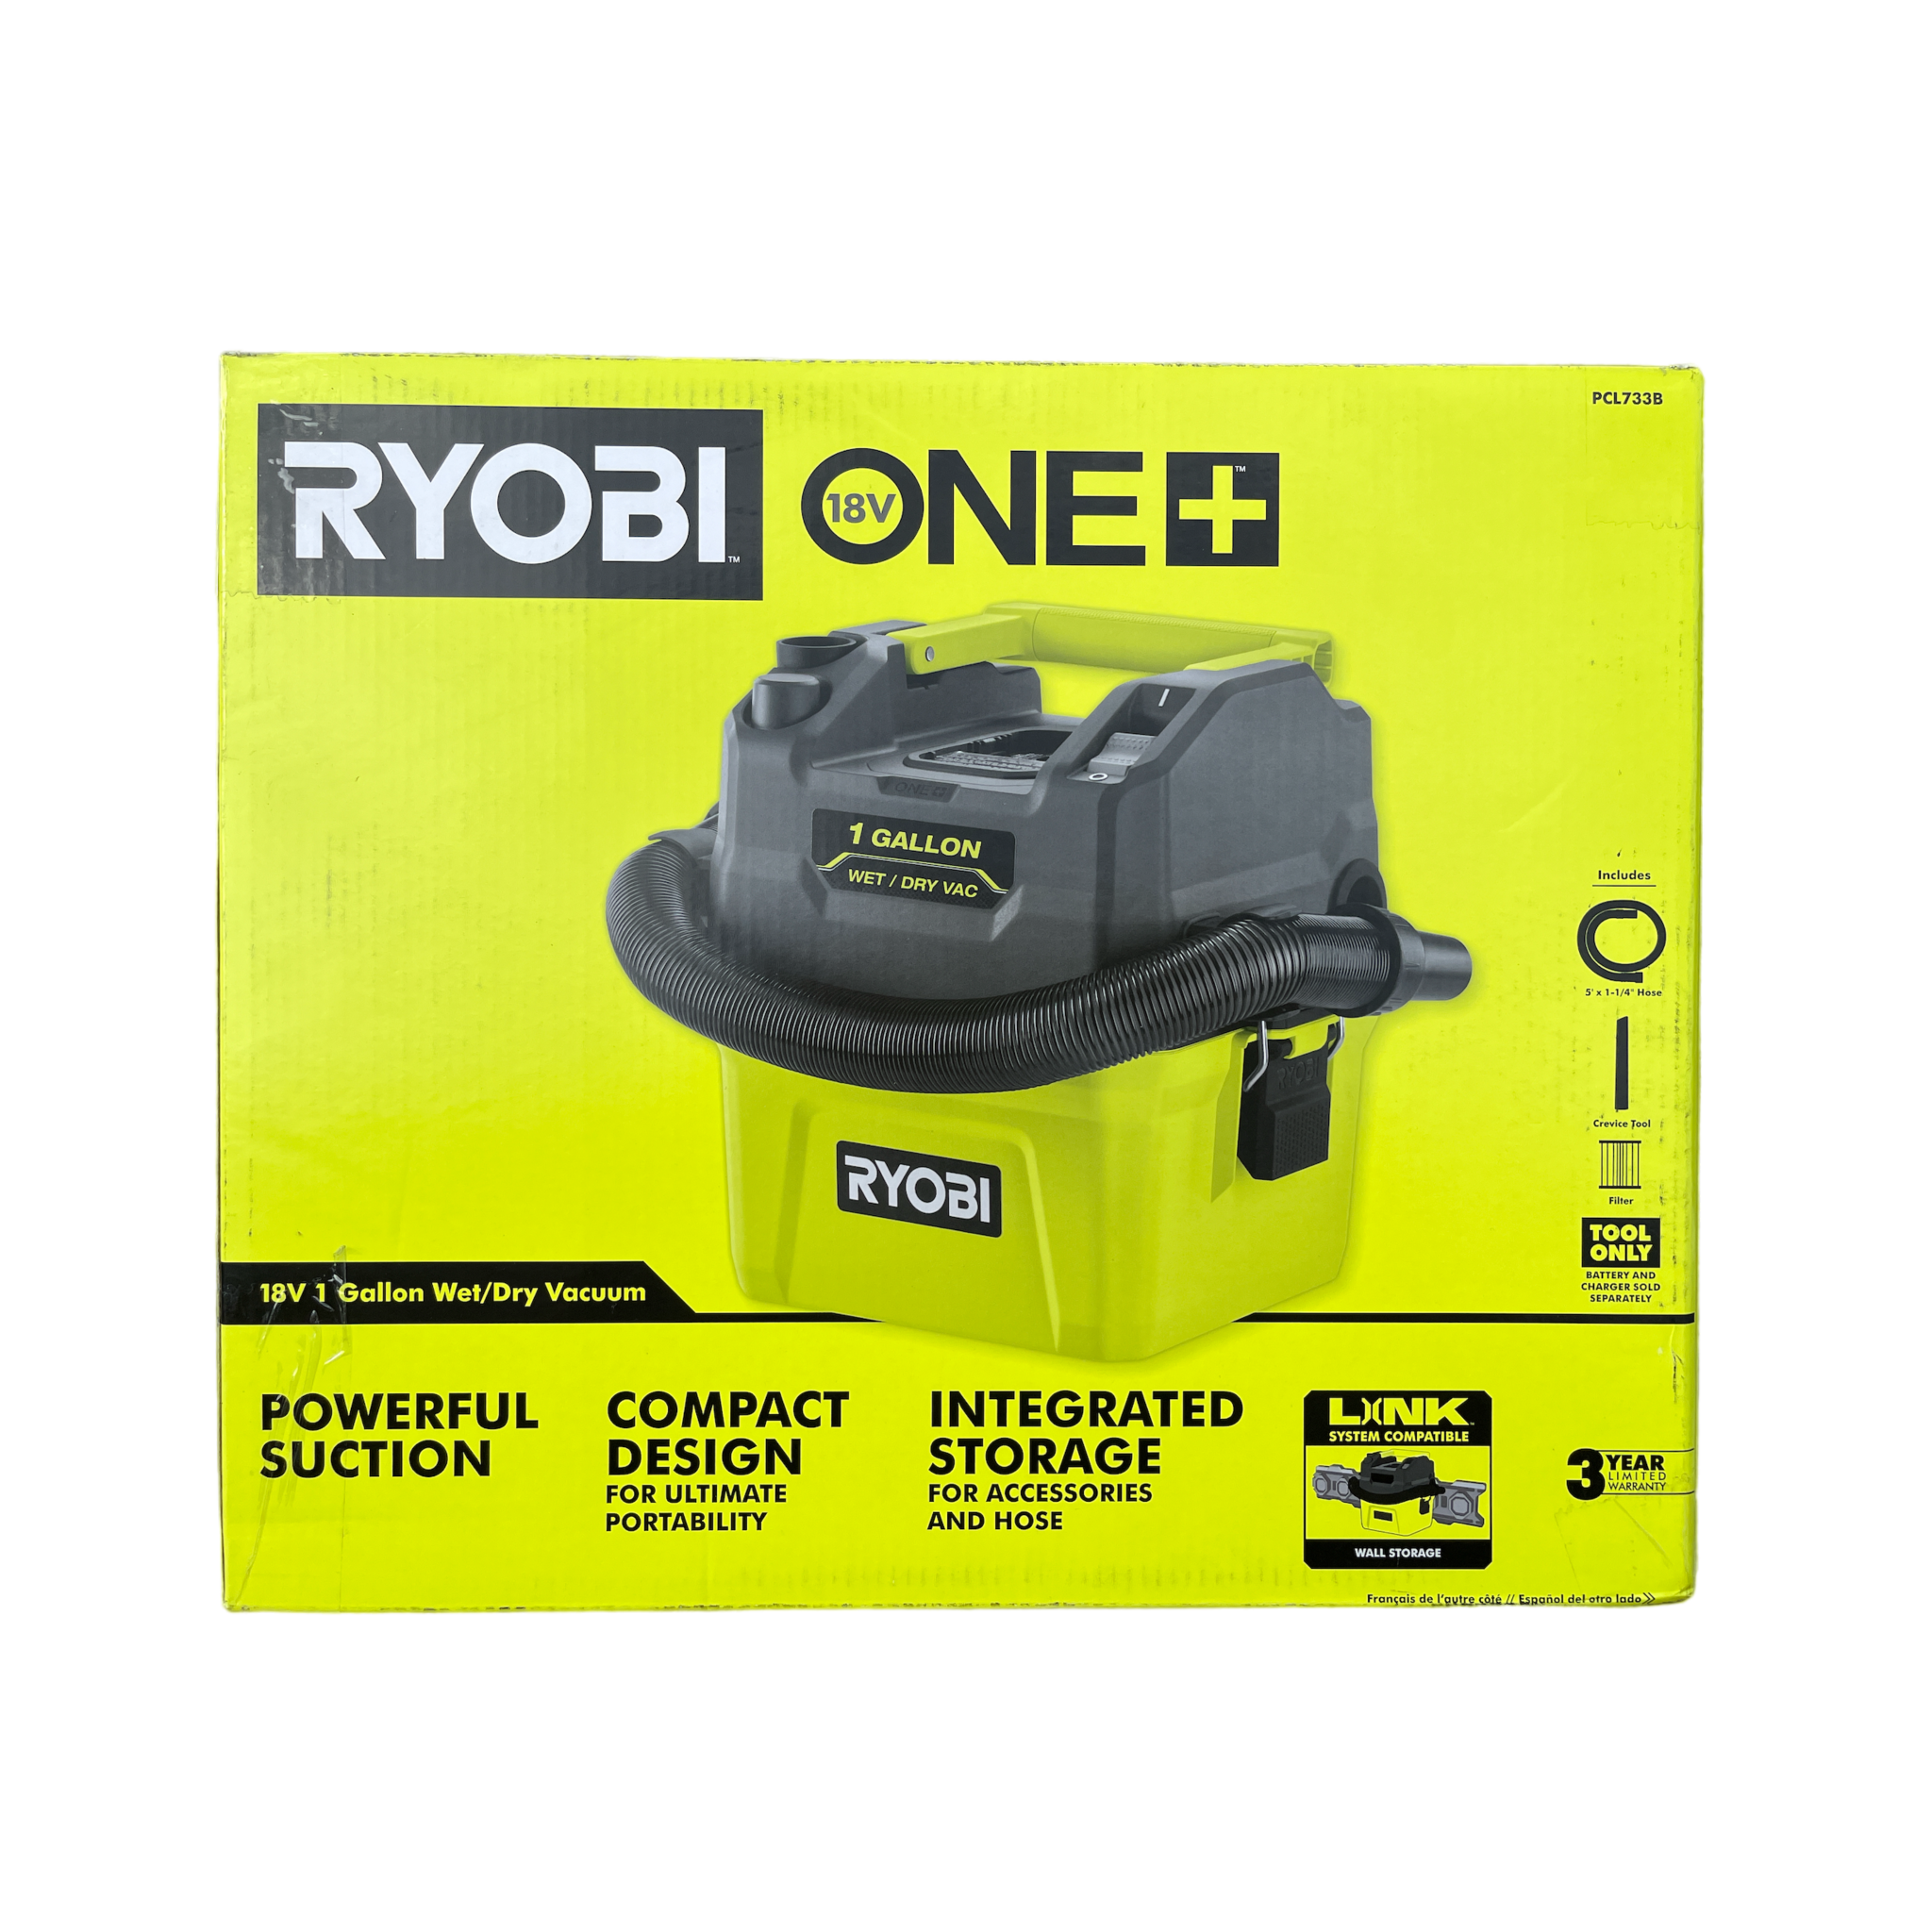 Ryobi 6 ft. x 1-1/4 in. Replacement Hose